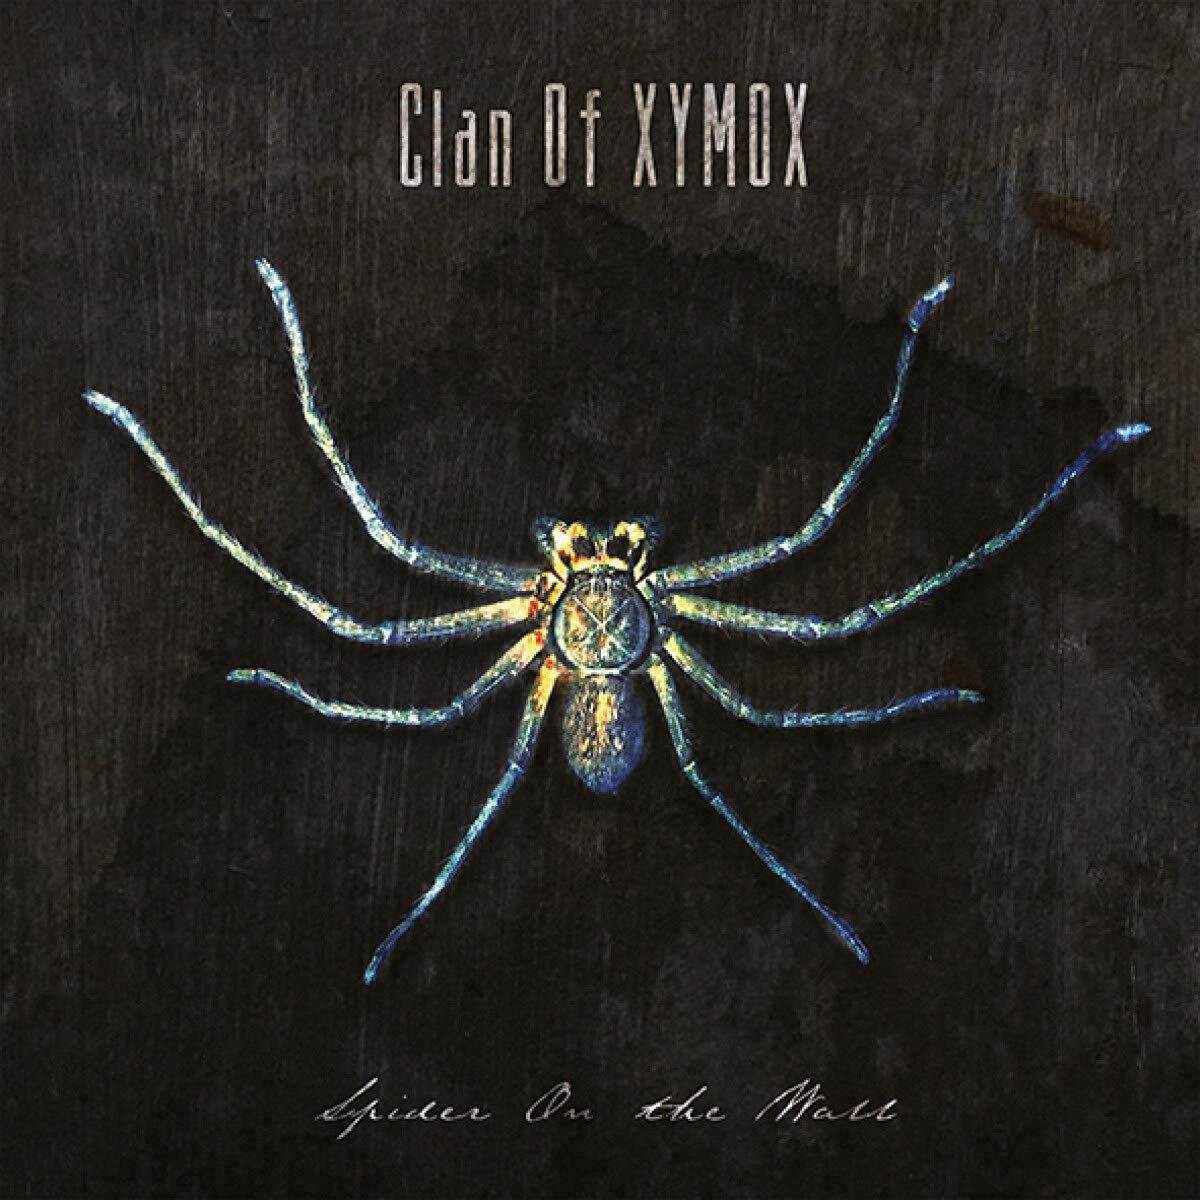 CD Shop - CLAN OF XYMOX SPIDER ON THE WALL SPLAT